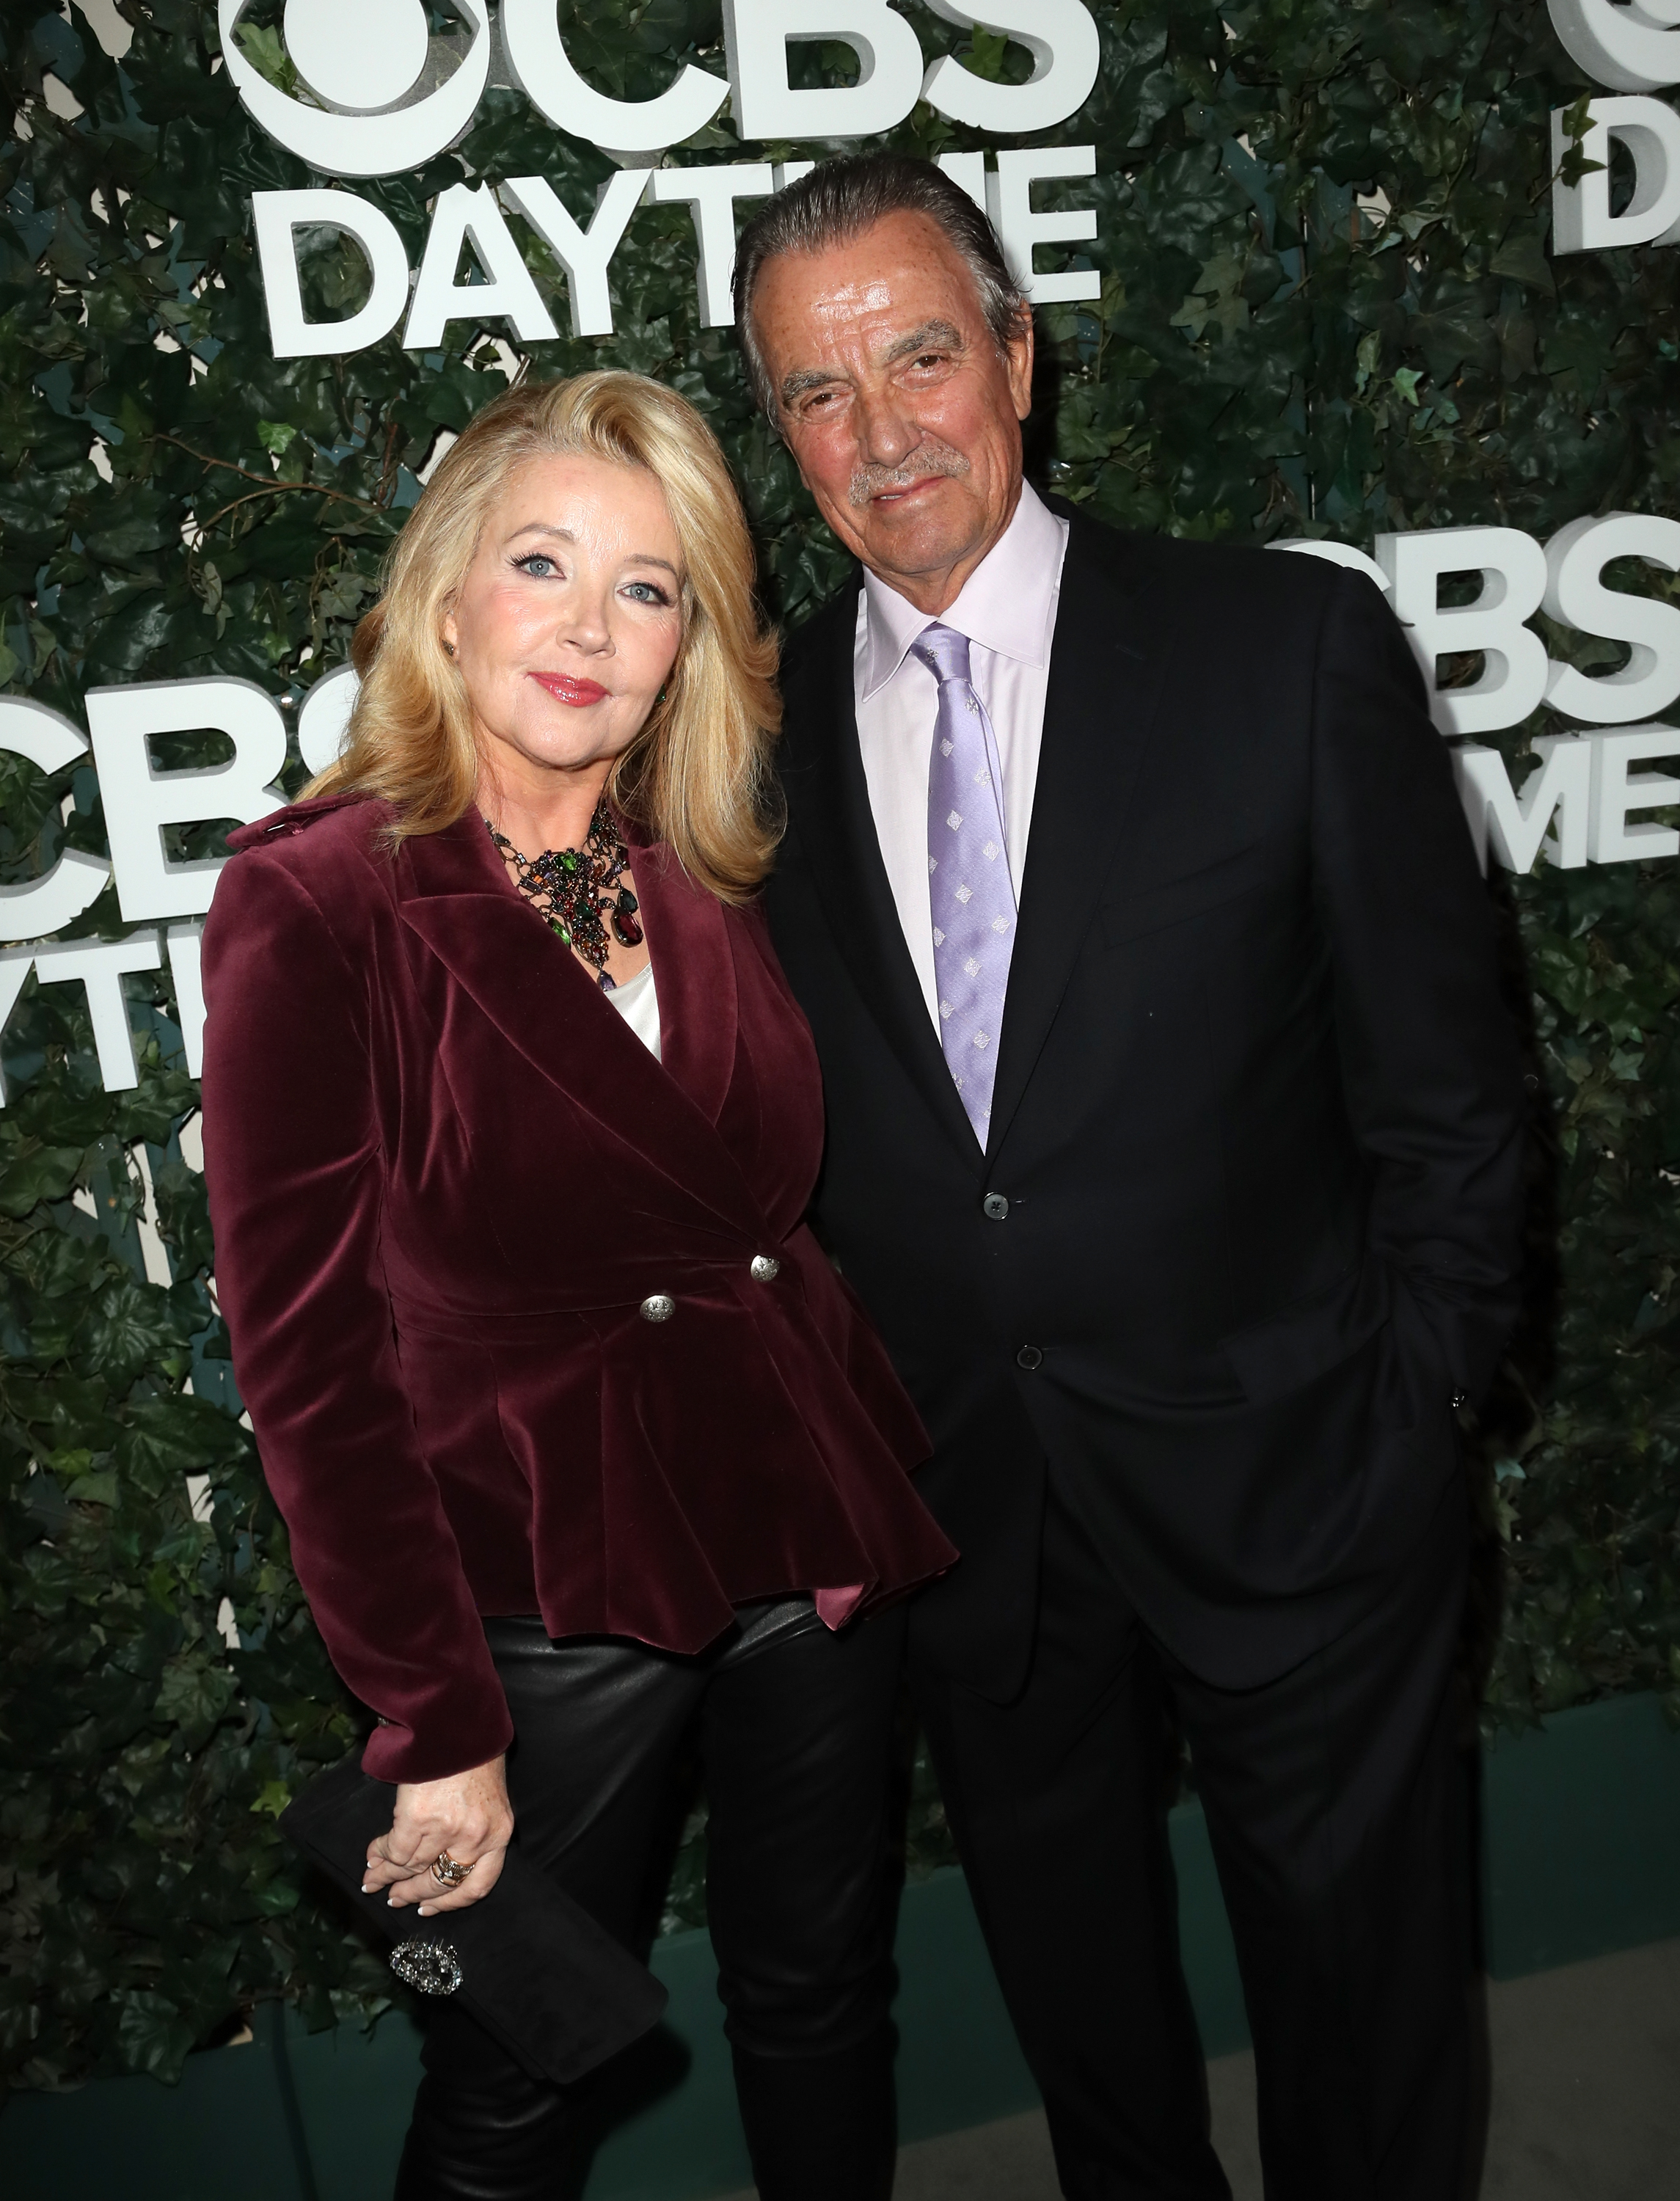 Dale Russell Gudegast and Eric Braeden at the CBS Daytime #1 for 30 Years on October 10, 2016, in Beverly Hills, California | Source: Getty Images